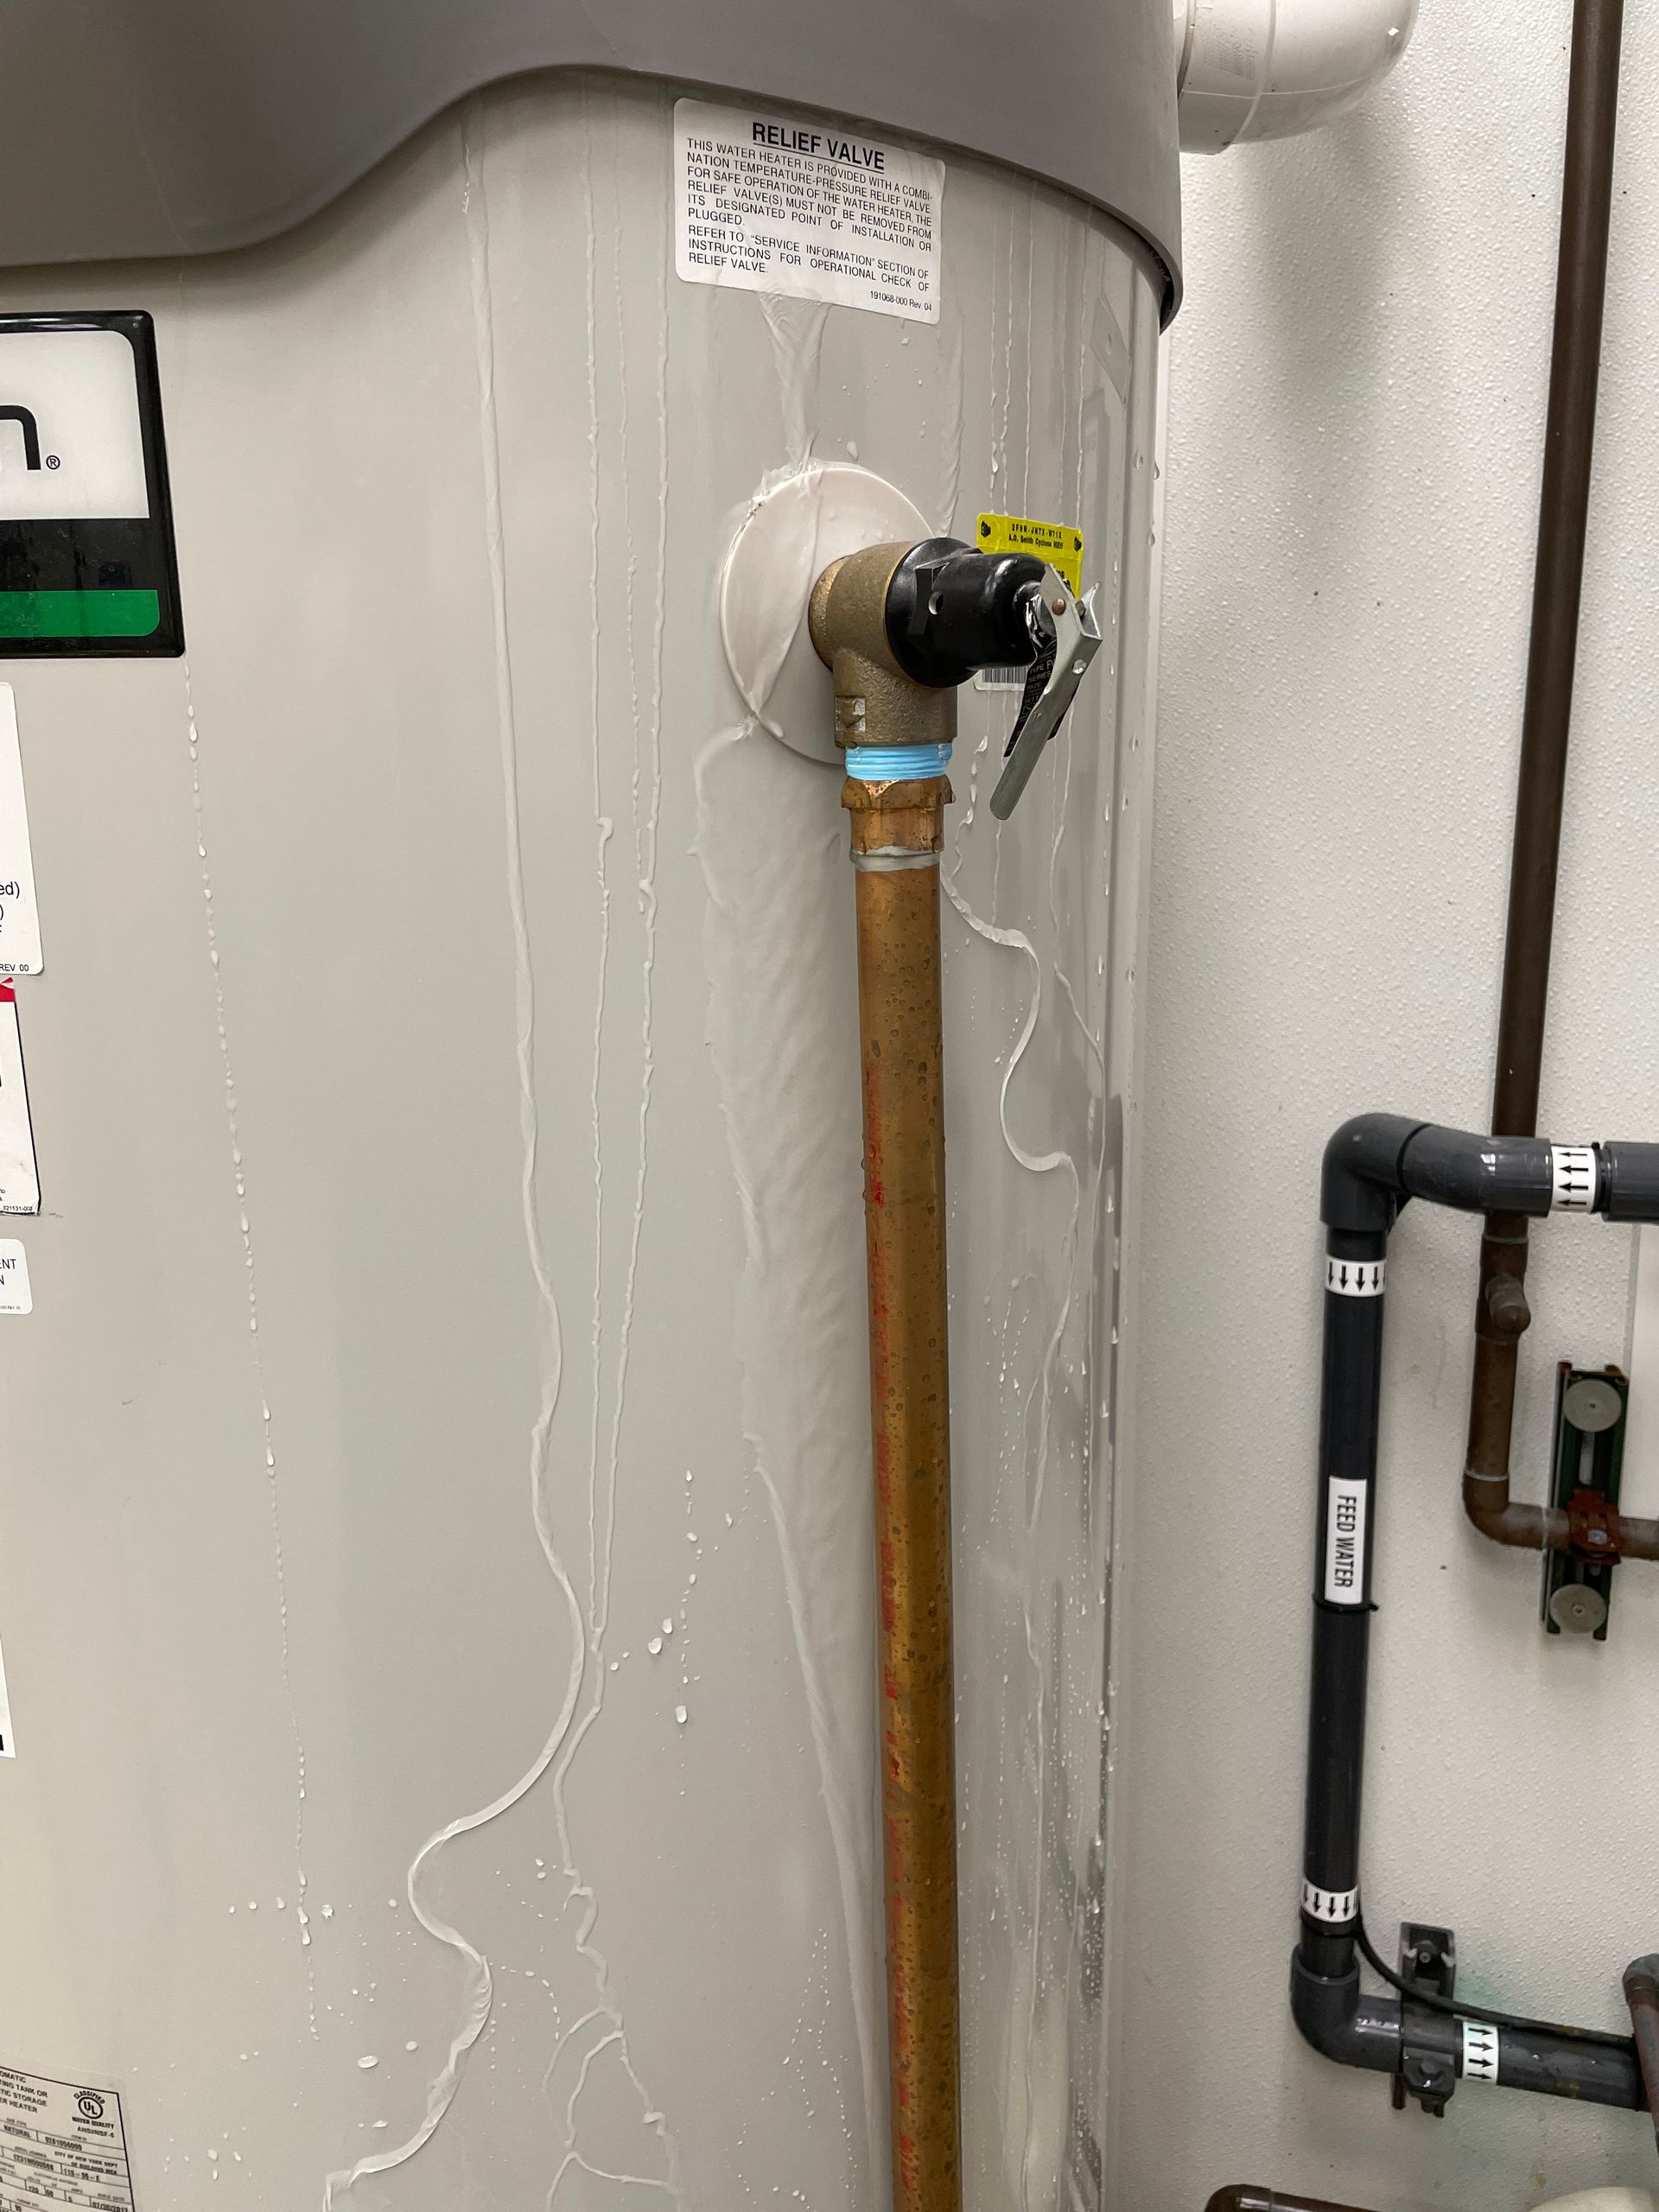 A.O. Smith Commercial Water Heater - Leaking from Beneath the Shroud